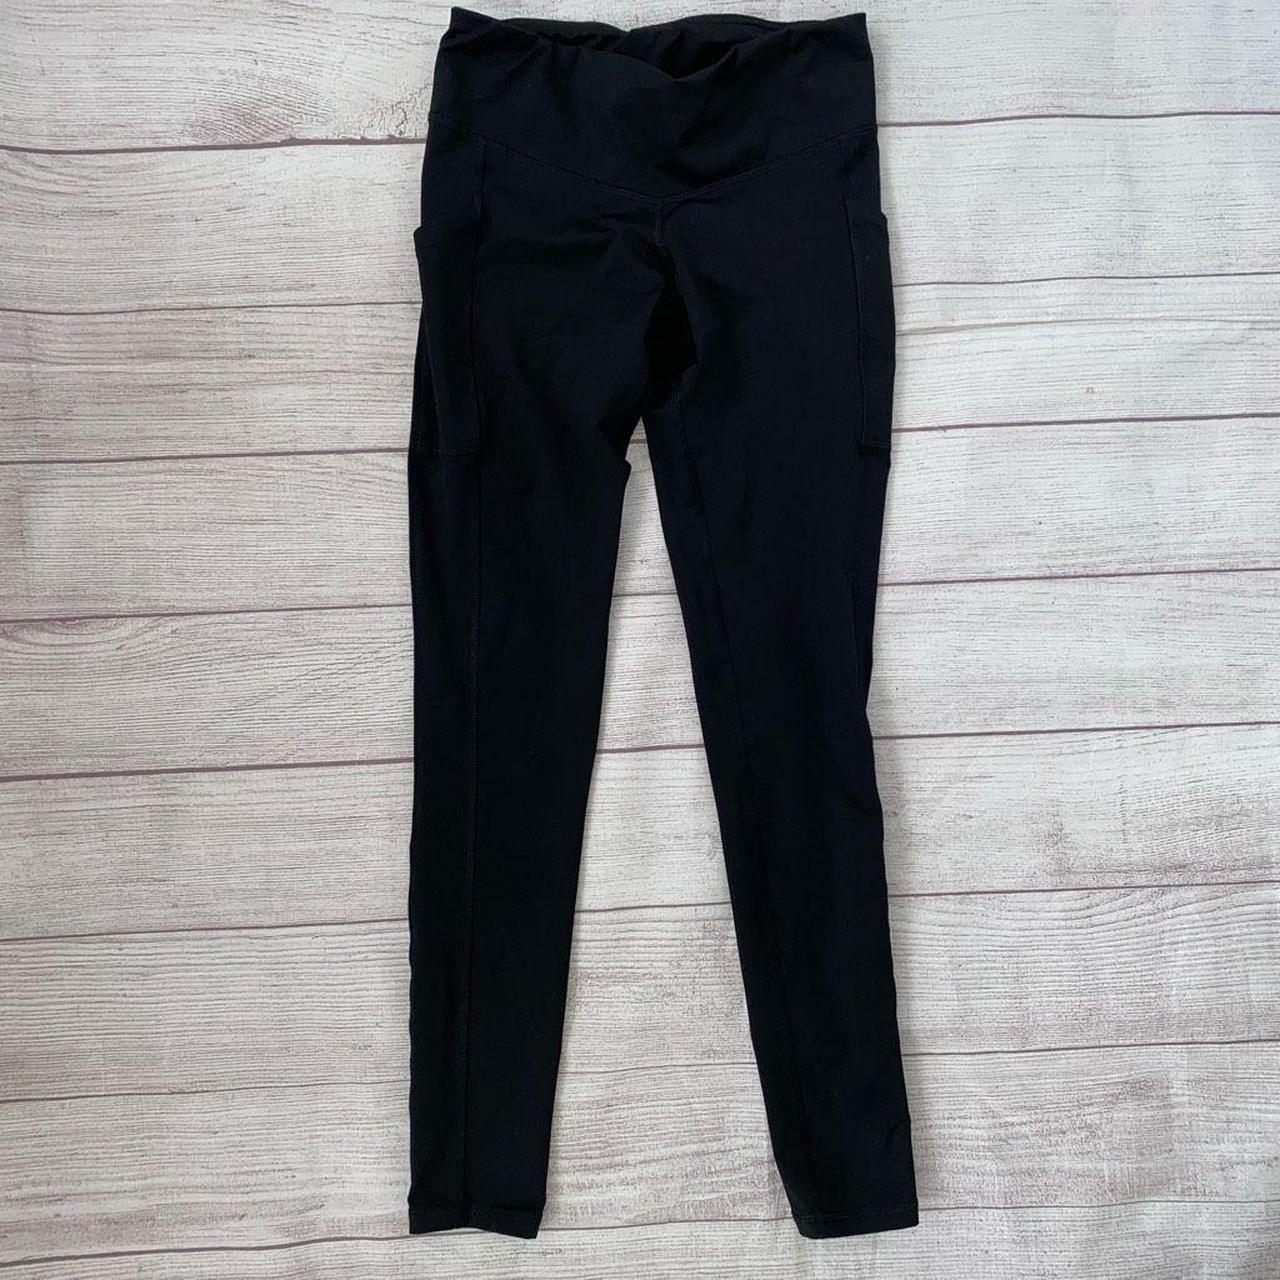 Champion Leggings With Side Pockets